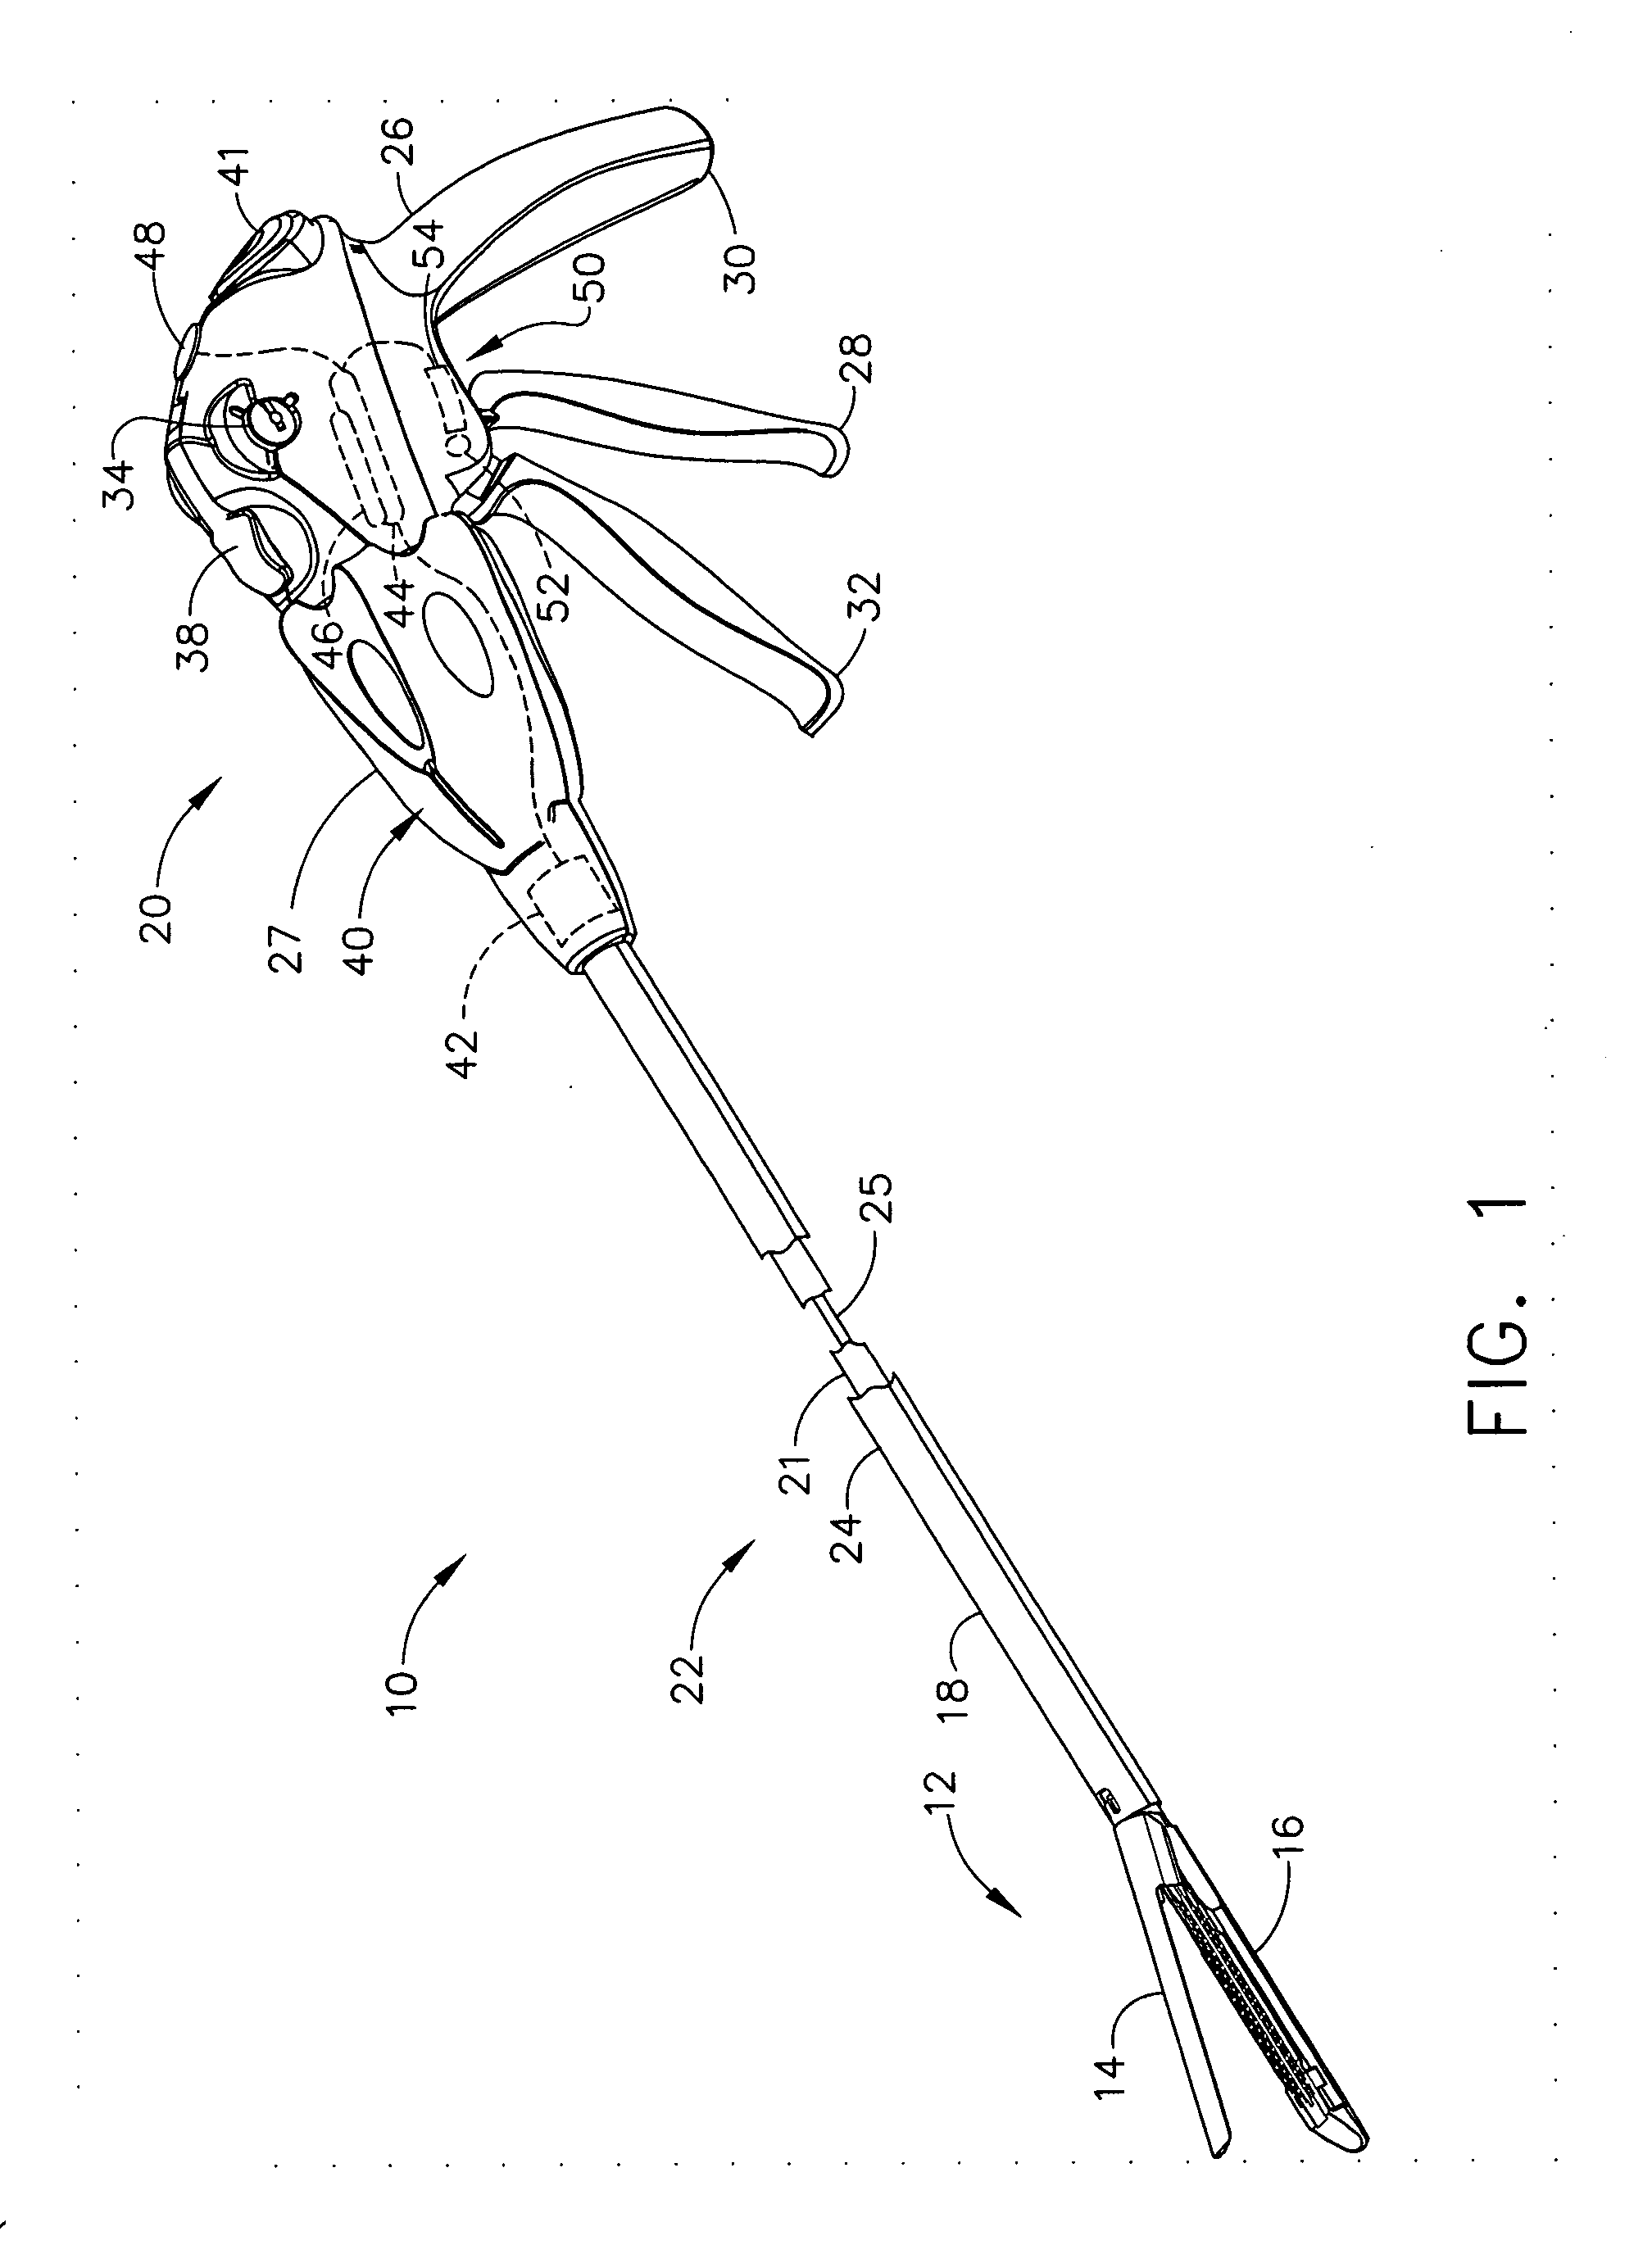 Multiple firing stroke surgical instrument incorporating electroactive polymer anti-backup mechanism